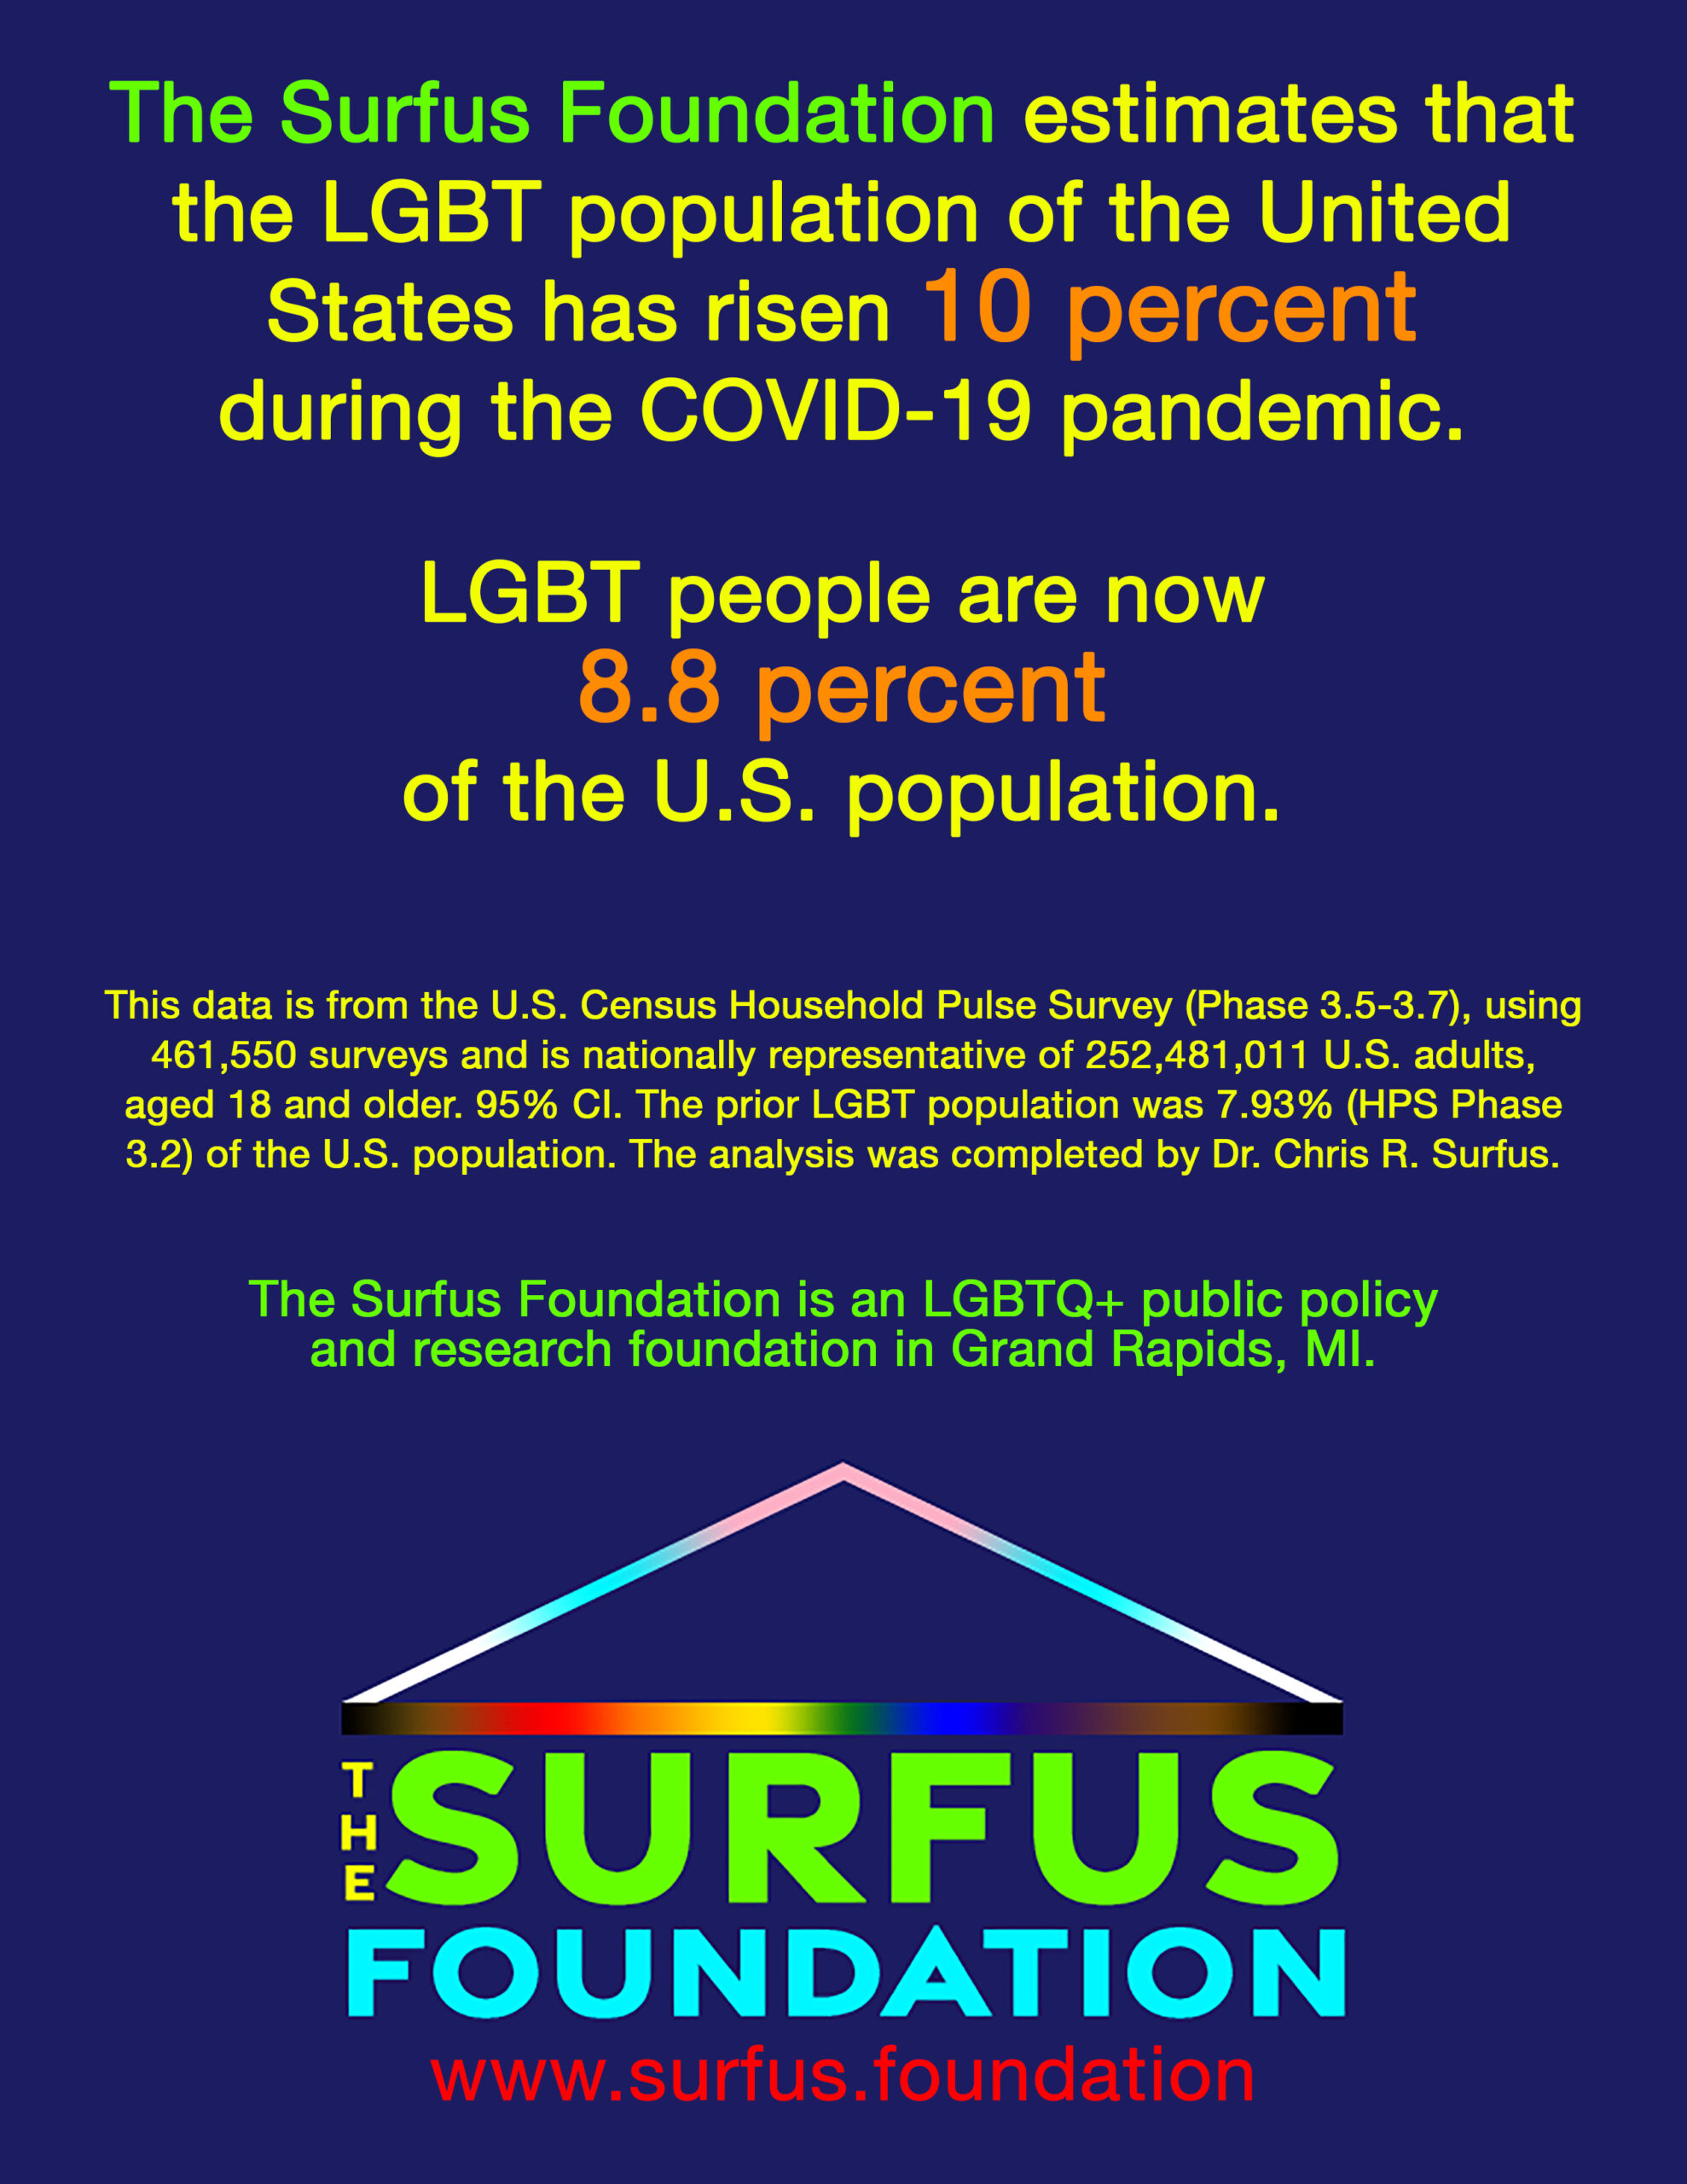 The Surfus Foundation estimates that the LGBT population of the United States has risen 10 percent during the COVID-19 pandemic. LGBT people are now 8.8 percent of the U.S. population. This data is from the U.S. Census Household Pulse Survey (Phase 3.5-3.7), using 461,550 surveys and is nationally representative of 252,481,011 U.S. adults, aged 18 and older. 95% CI. The prior LGBT population was 7.93% (HPS Phase 3.2) of the U.S. population. The analysis was completed by Dr. Chris R. Surfus. The Surfus Foundation is an LGBTQ+ public policy and research foundation in Grand Rapids, MI.